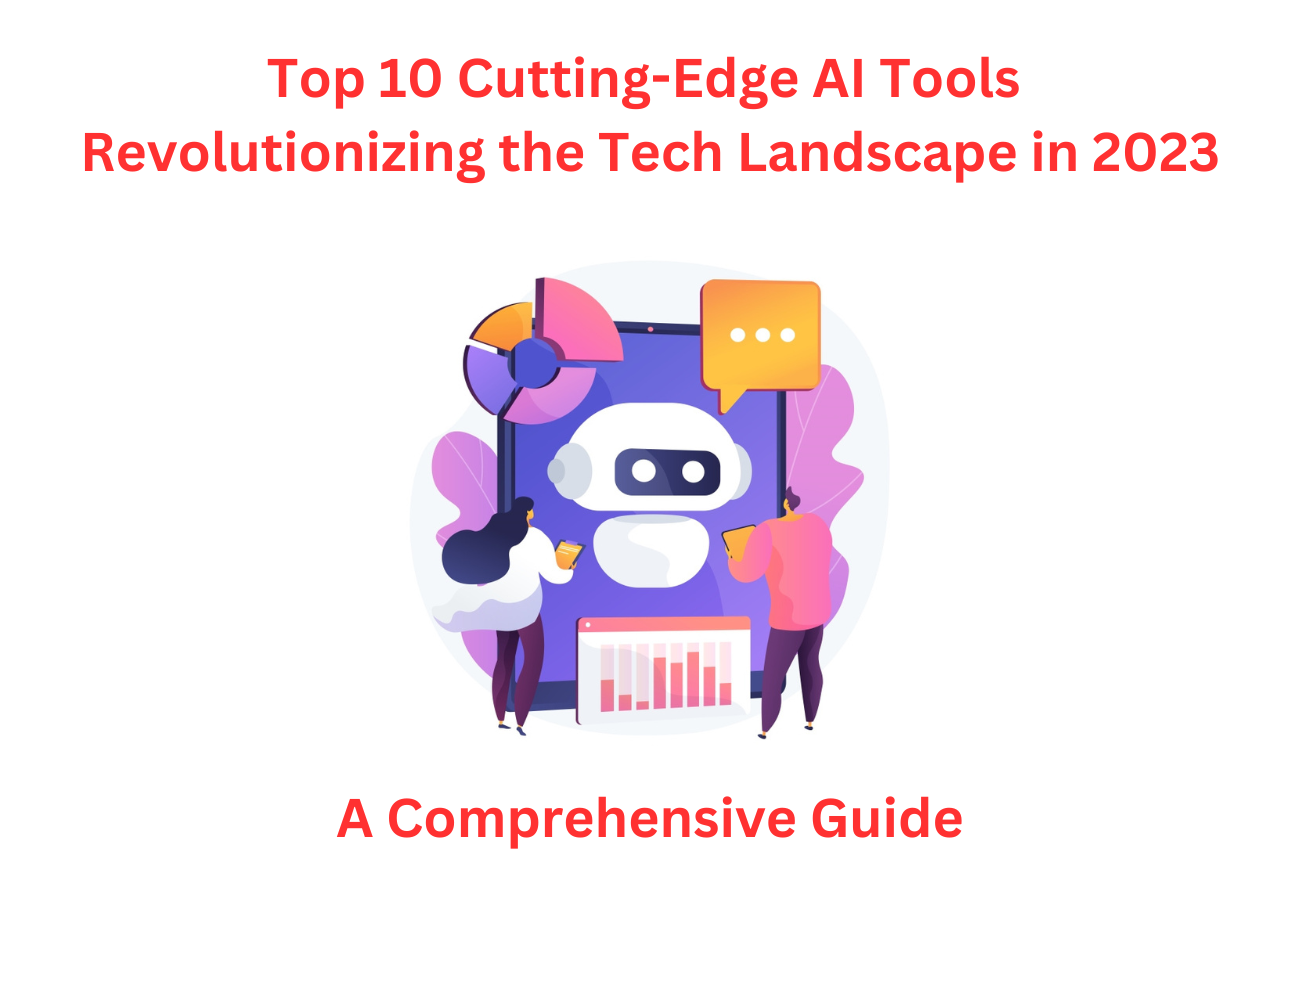 Top-10-Cutting-Edge-AI-Tools-Revolutionizing-the-Tech-Landscape-in-2023-A-Comprehensive-Guide